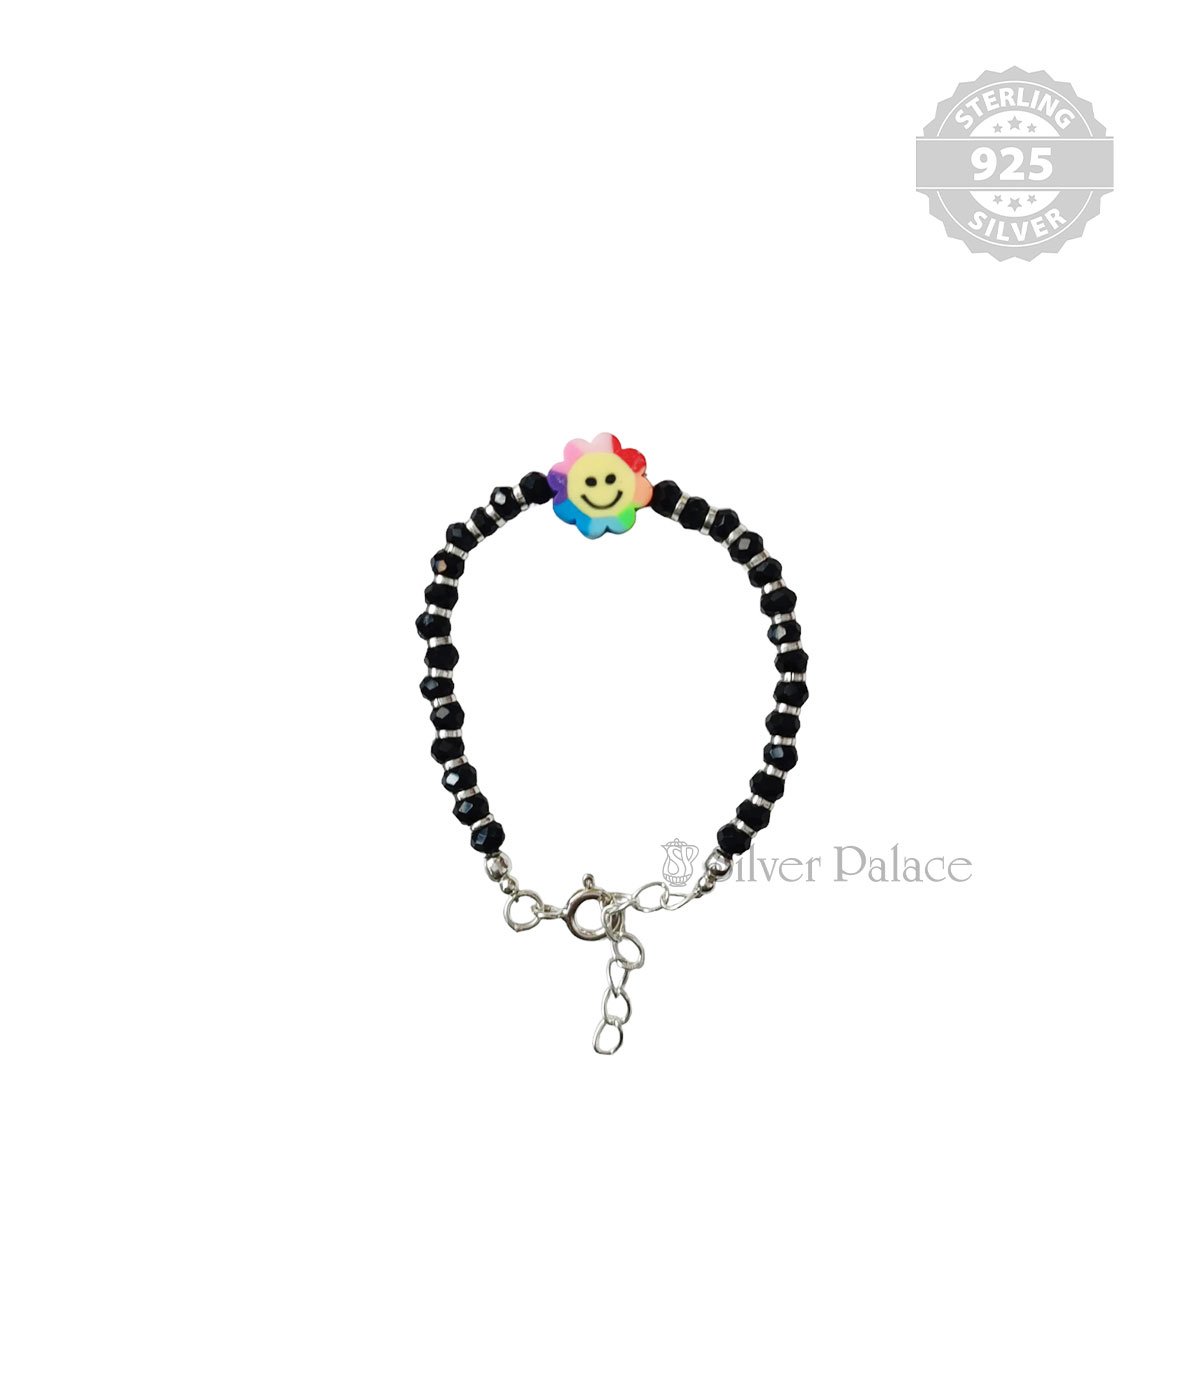 STERLING SILVER BLACK AND SUN BEAD ANKLET FOR KIDS